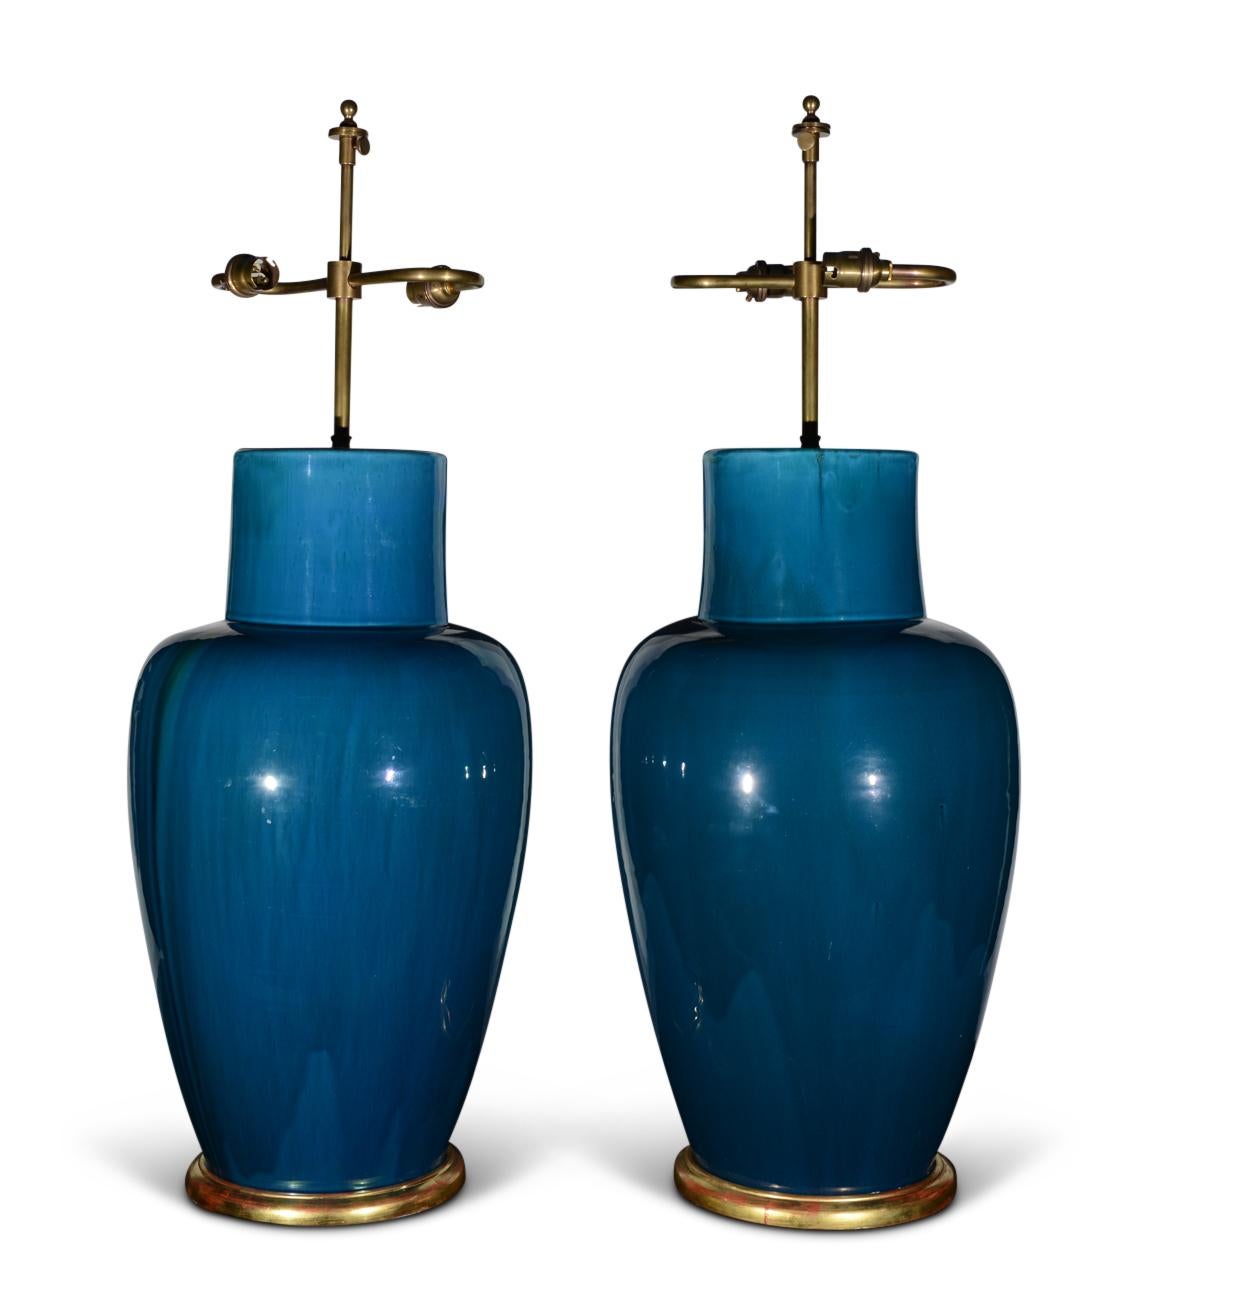 A superb pair of late 19th century, early 20th century large Chinese turquoise flambé glazed baluster vases, each with shouldered ovoid bodies with cylindrical necks, now mounted as table lamps with hand gilded turned bases.

Height of vases:  20